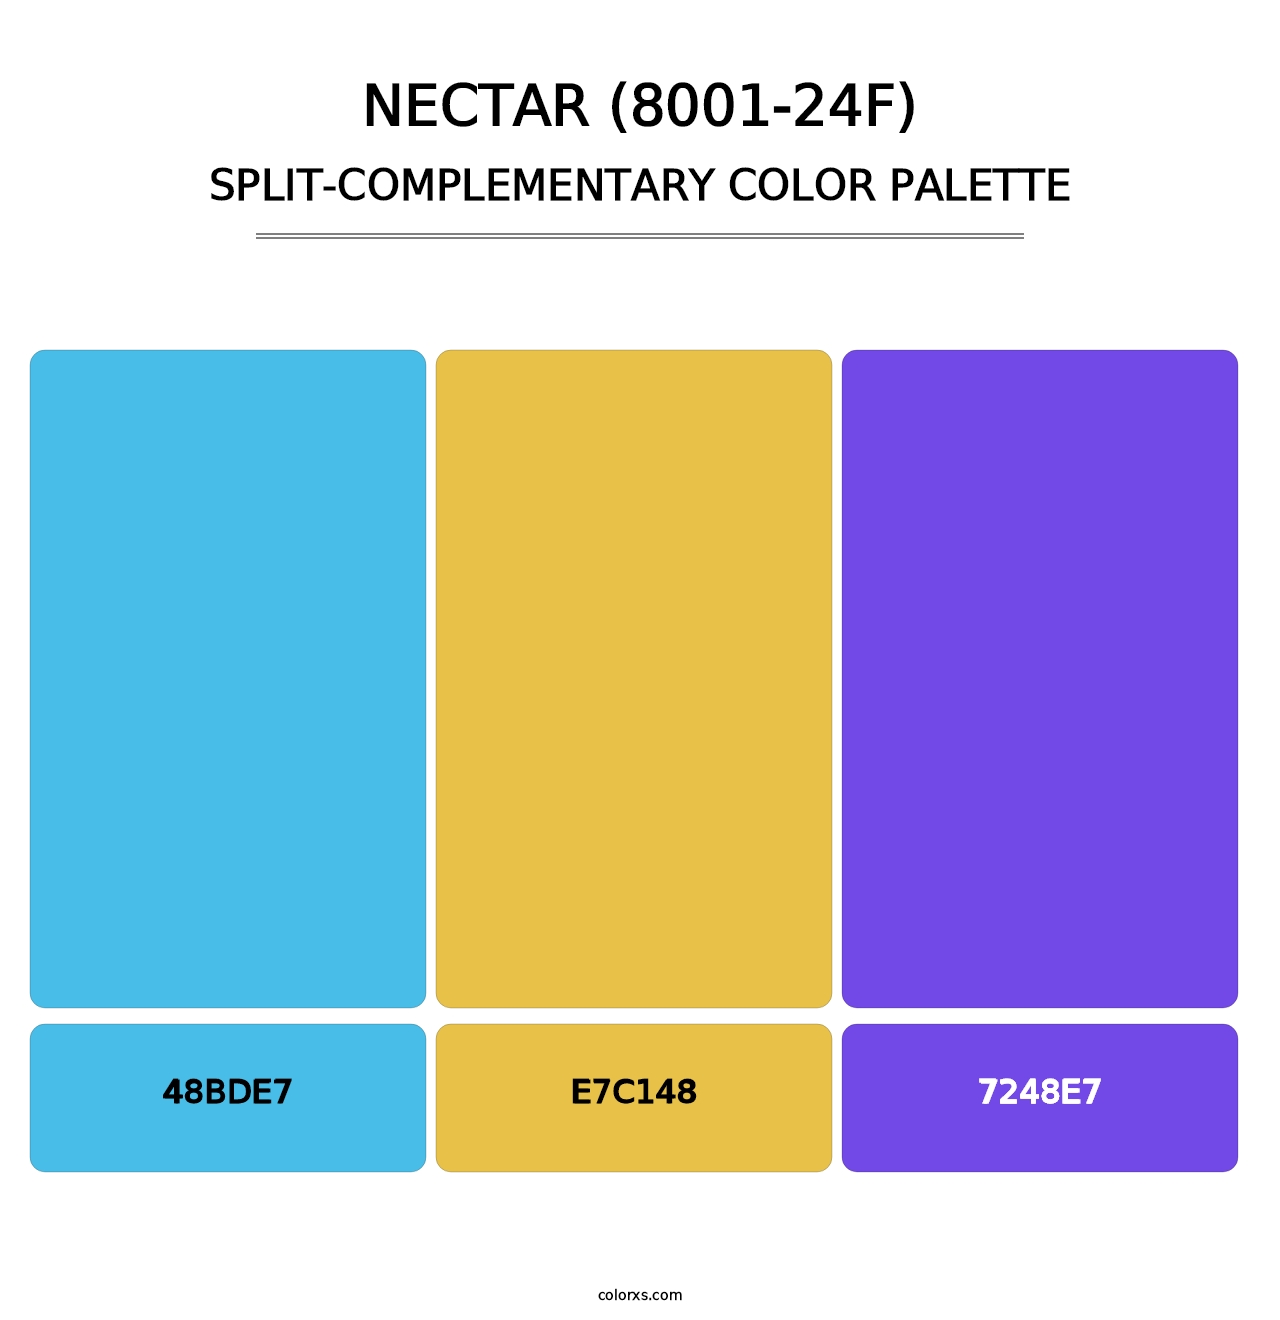 Nectar (8001-24F) - Split-Complementary Color Palette